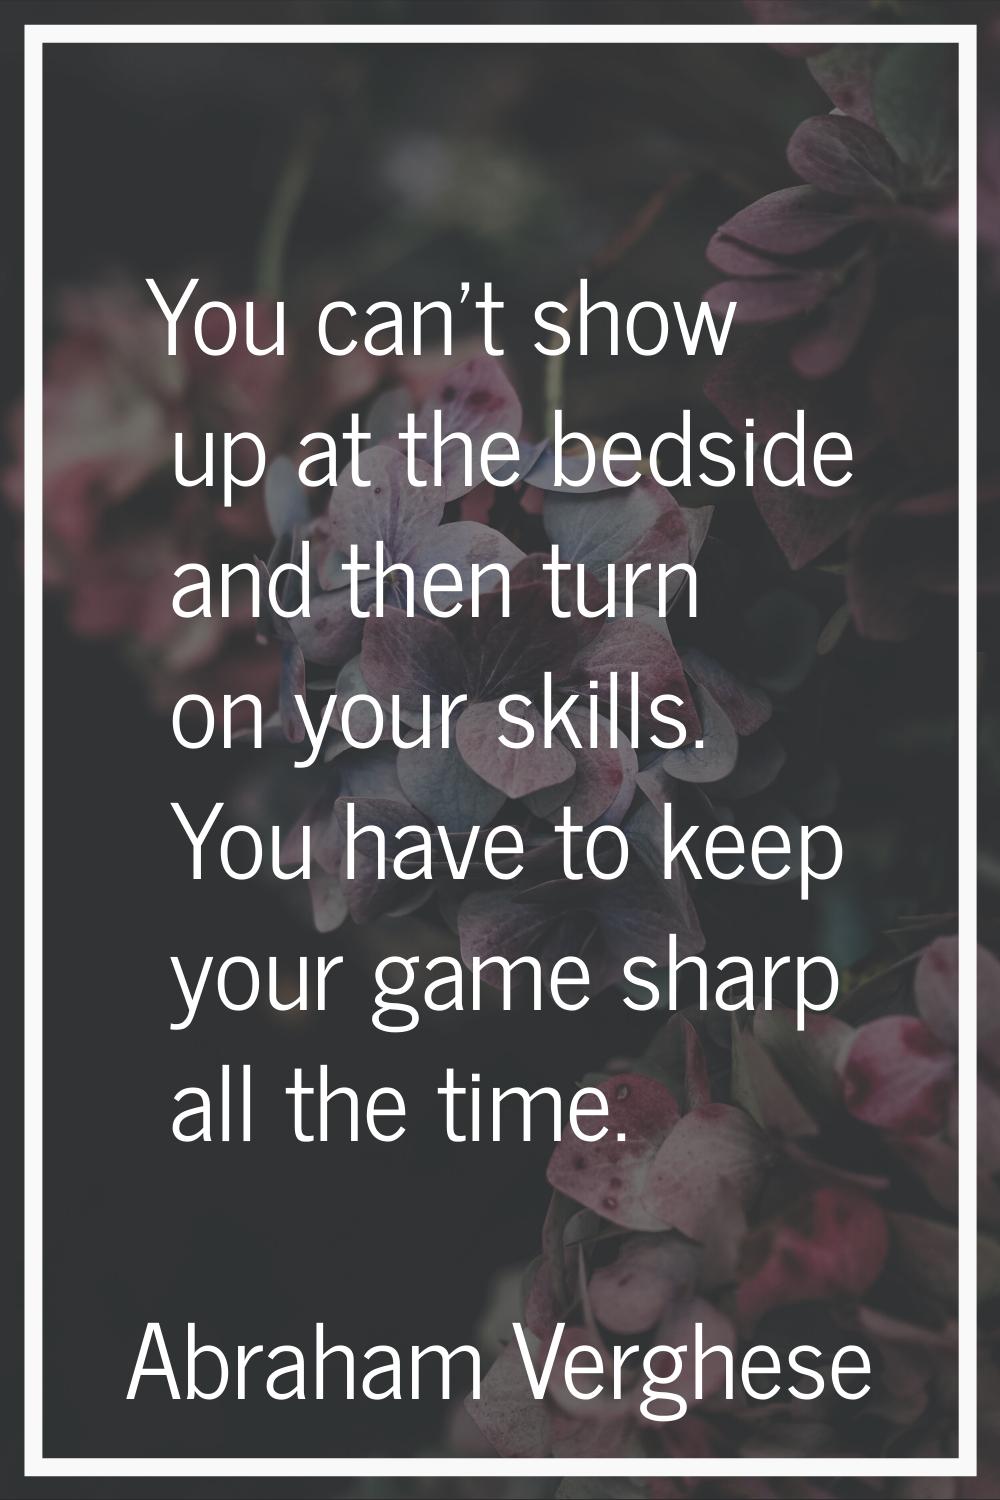 You can't show up at the bedside and then turn on your skills. You have to keep your game sharp all